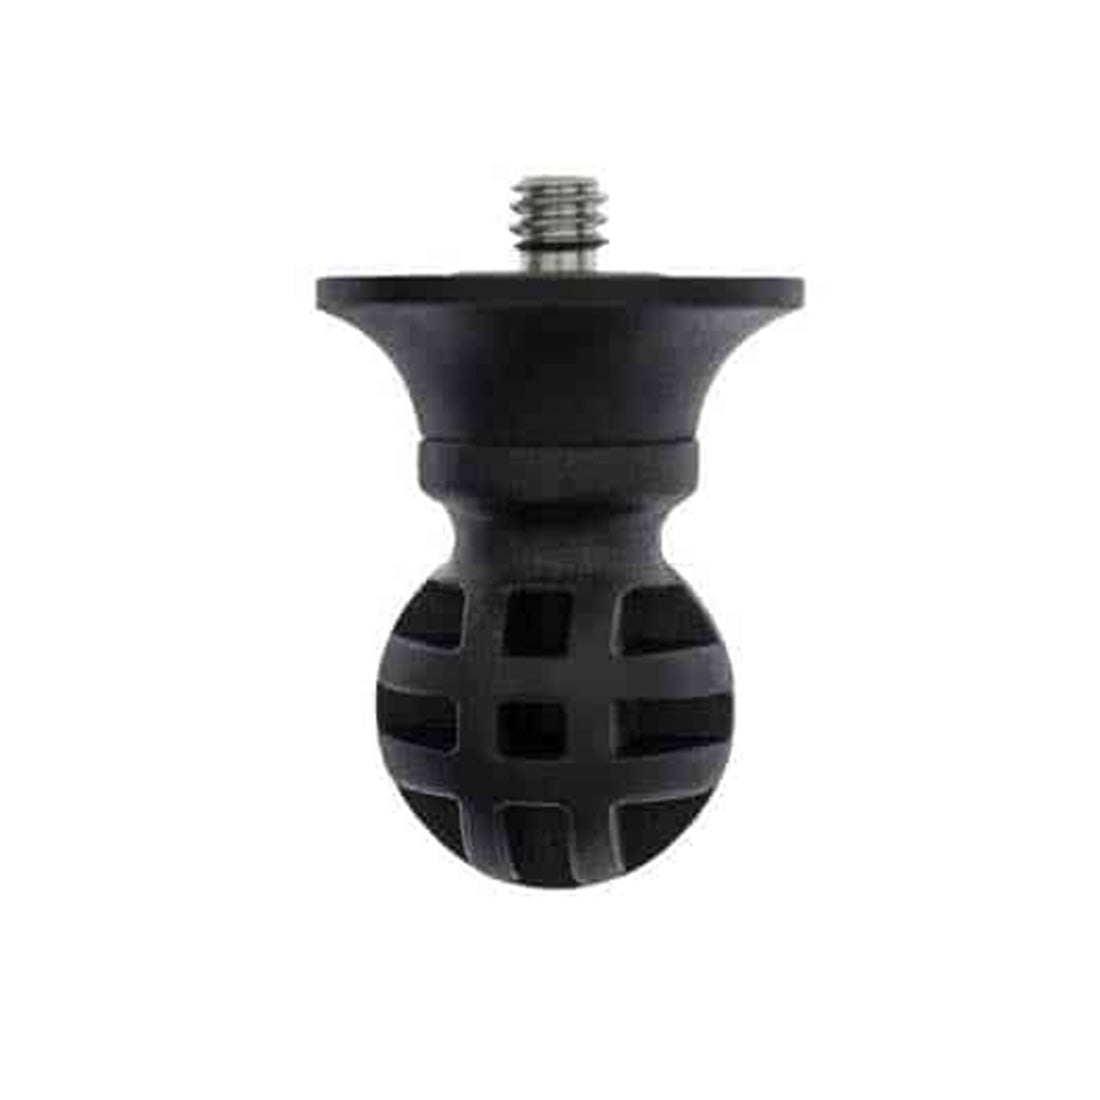 TRIPOD ADAPTER 1/4" FOR FLYMONT ORIGINAL